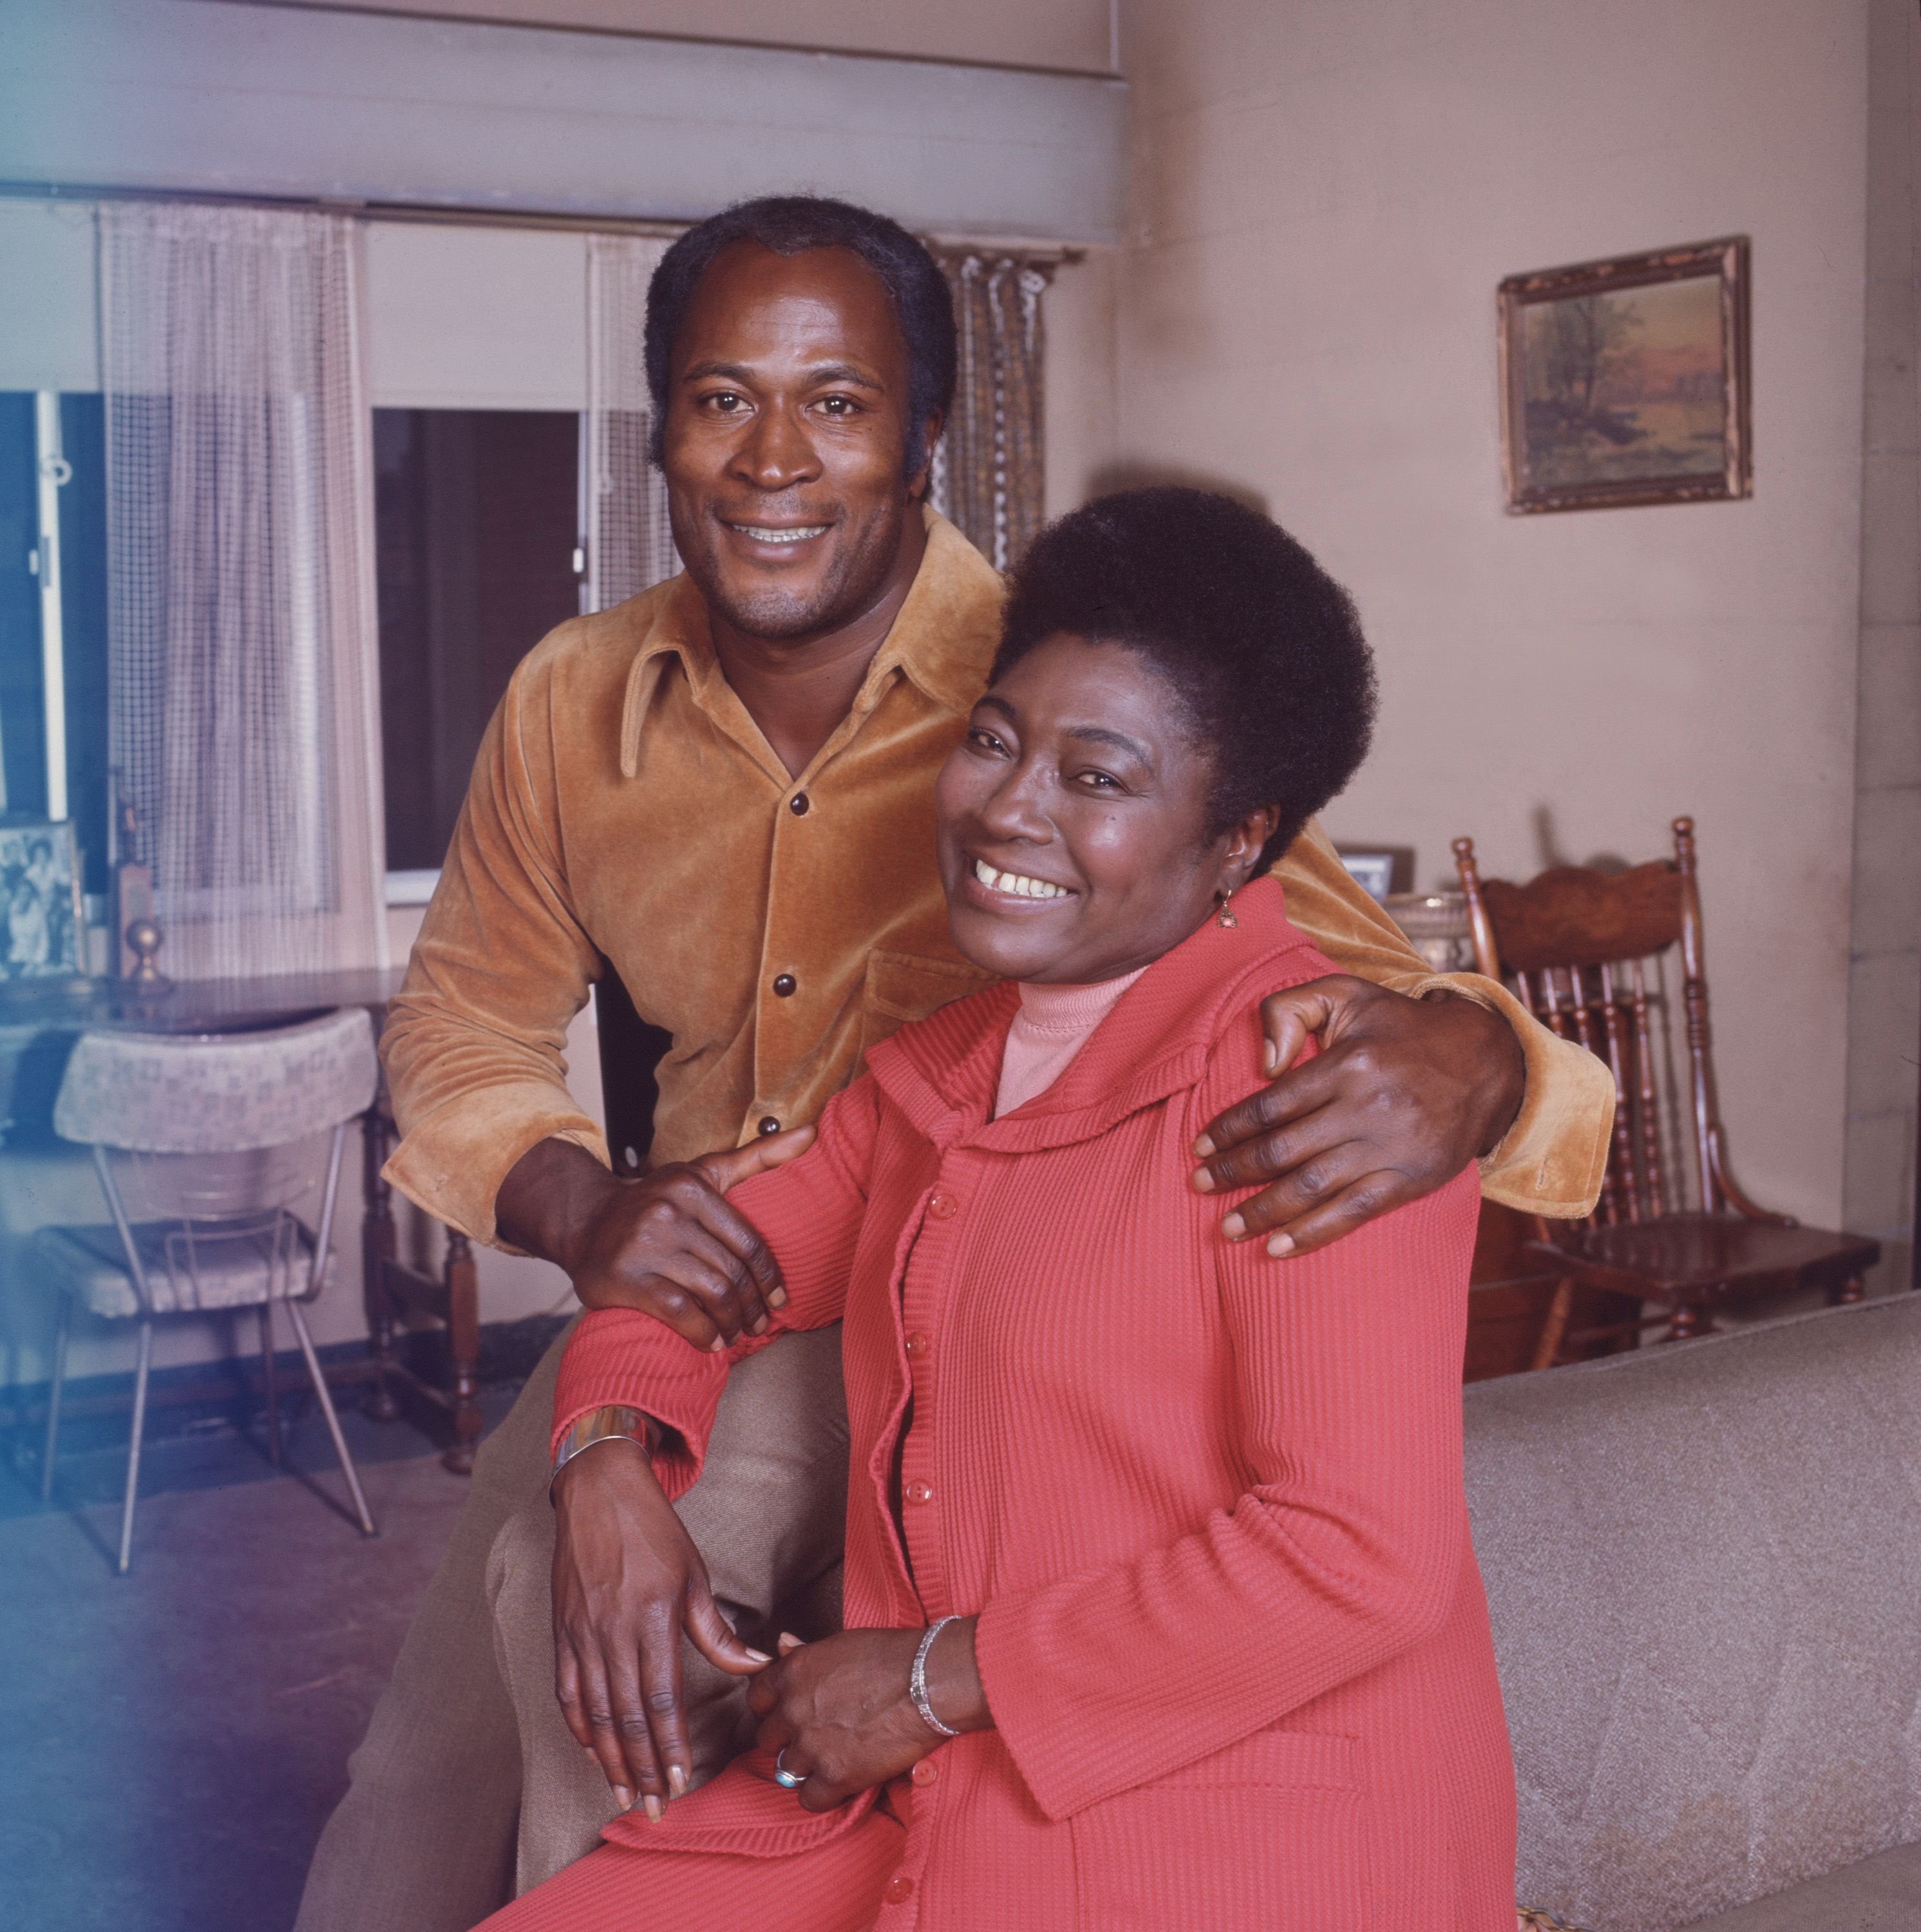 John Amos and Esther Rolle of the television show "Good Times" in California in 1975 | Photo: Getty Images